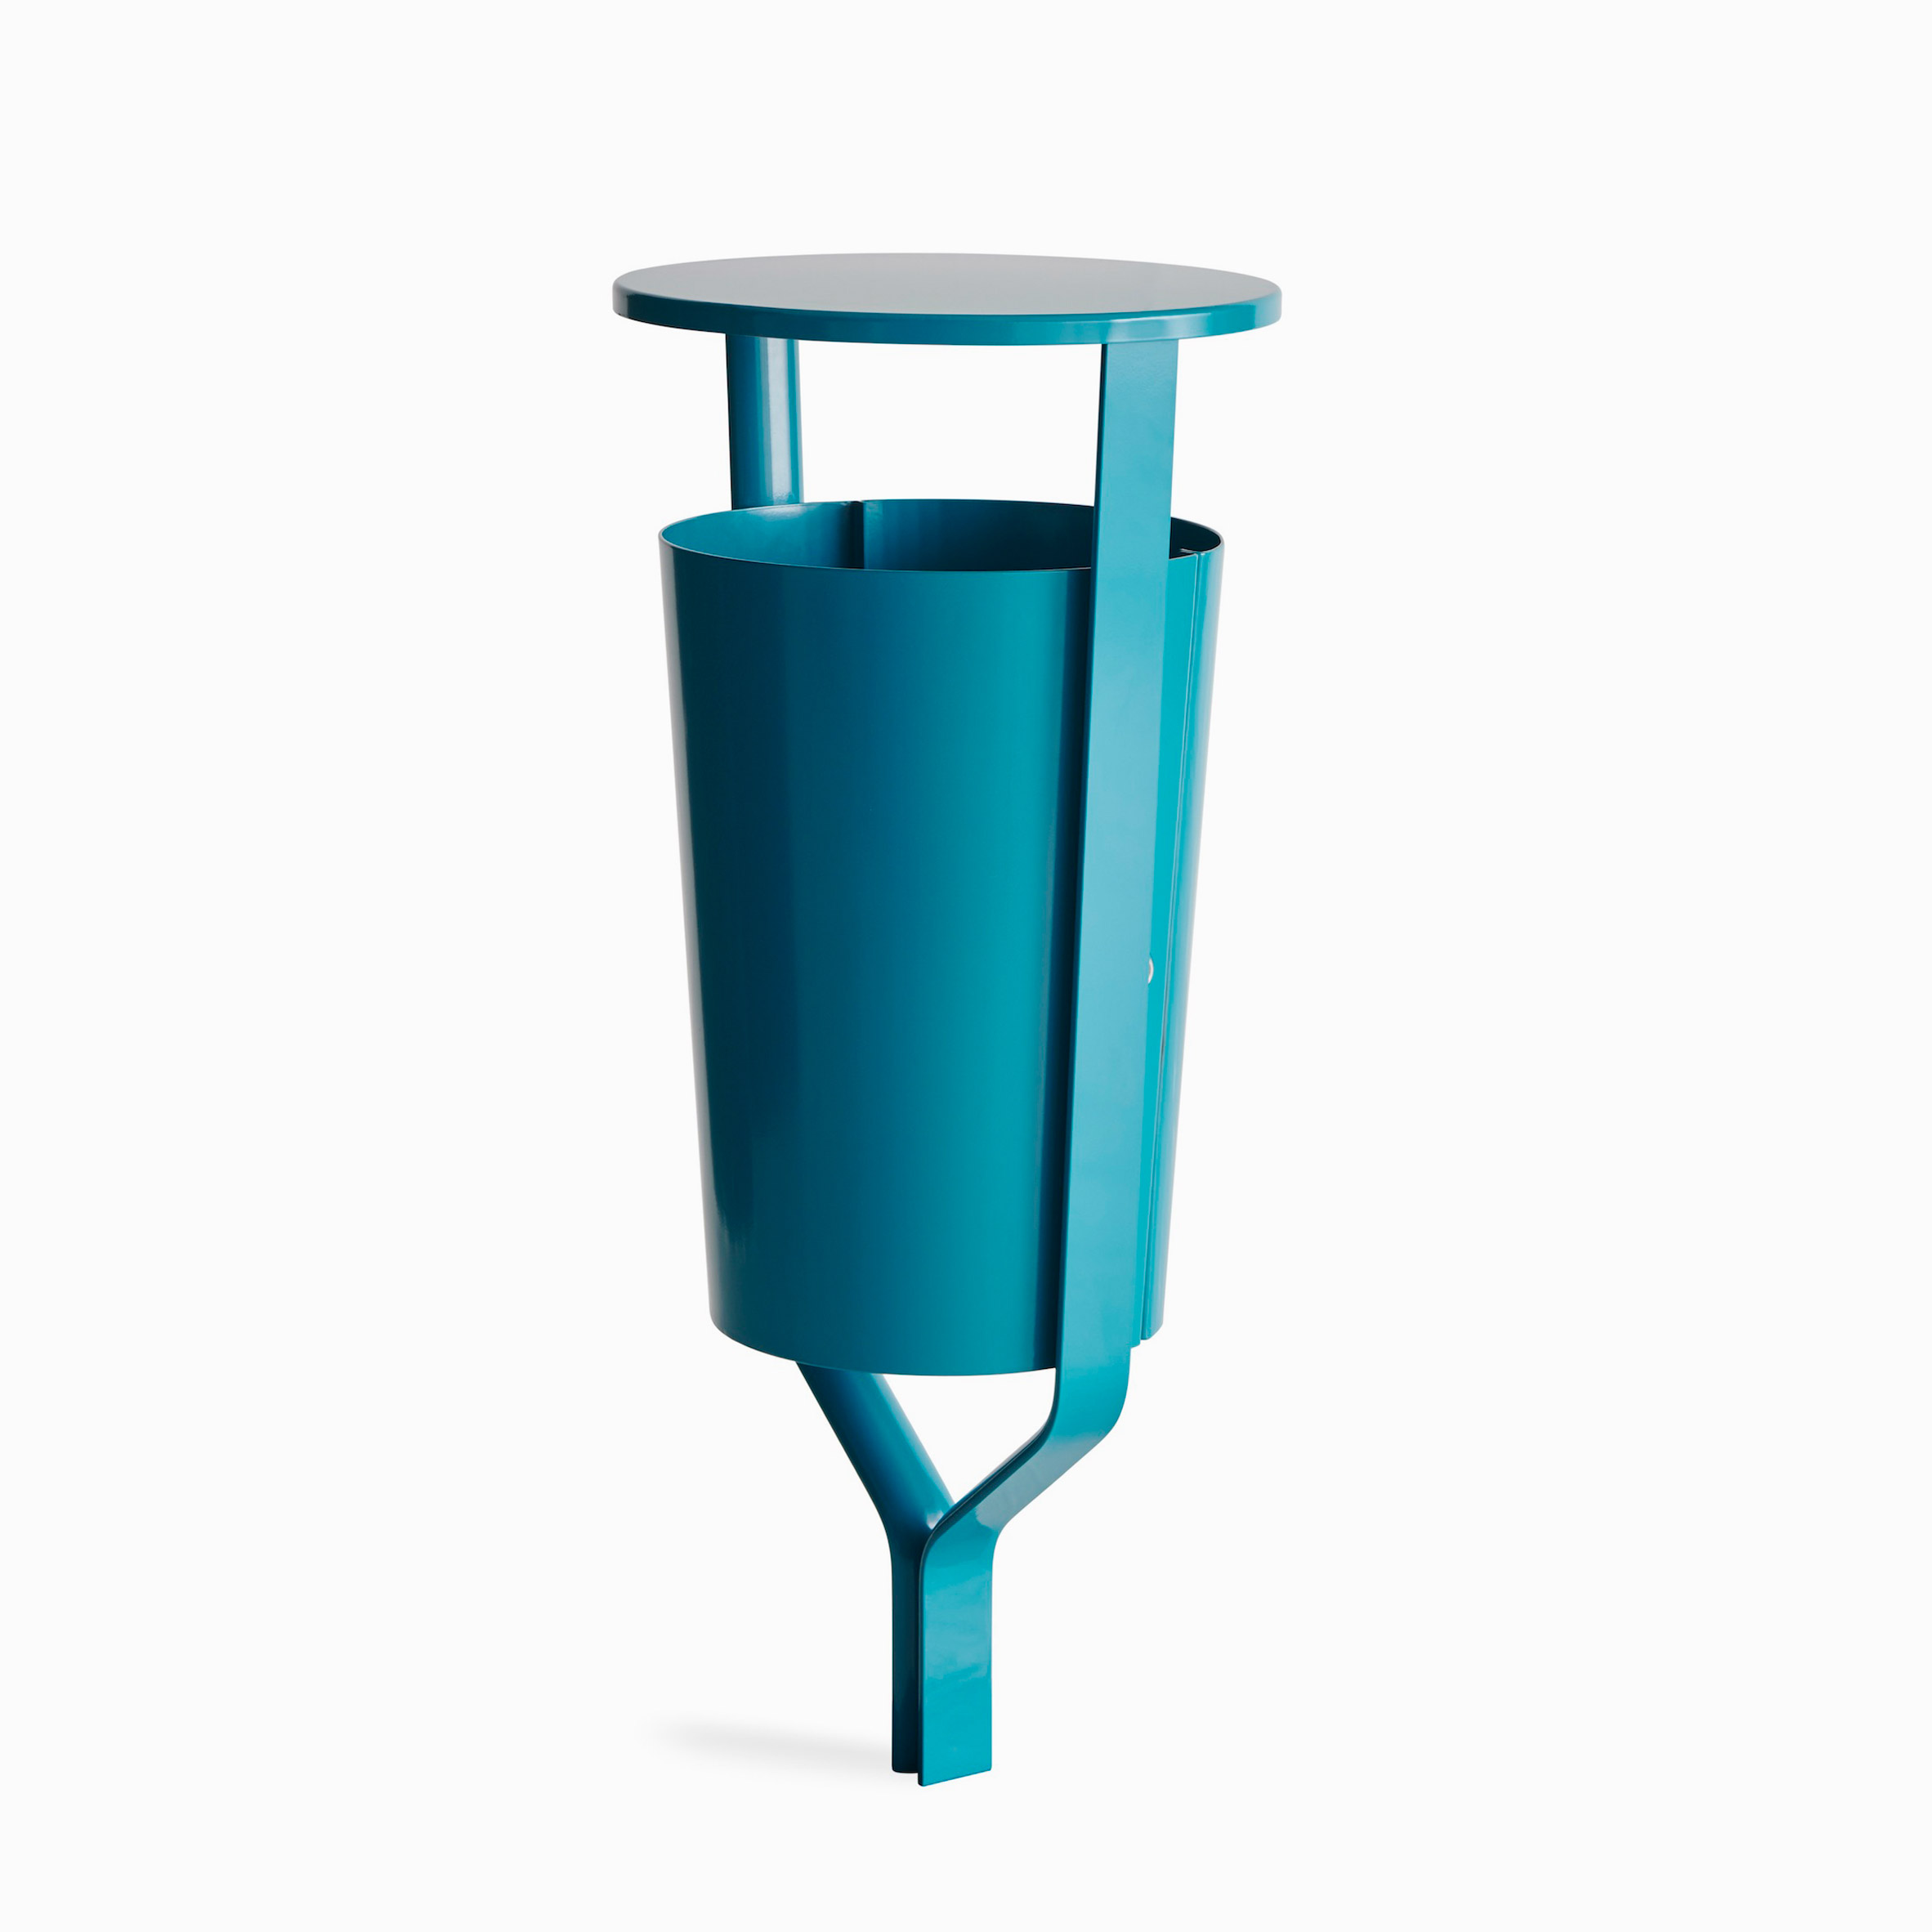 Bin in the Folk outdoor furniture collection by Vestre and Front